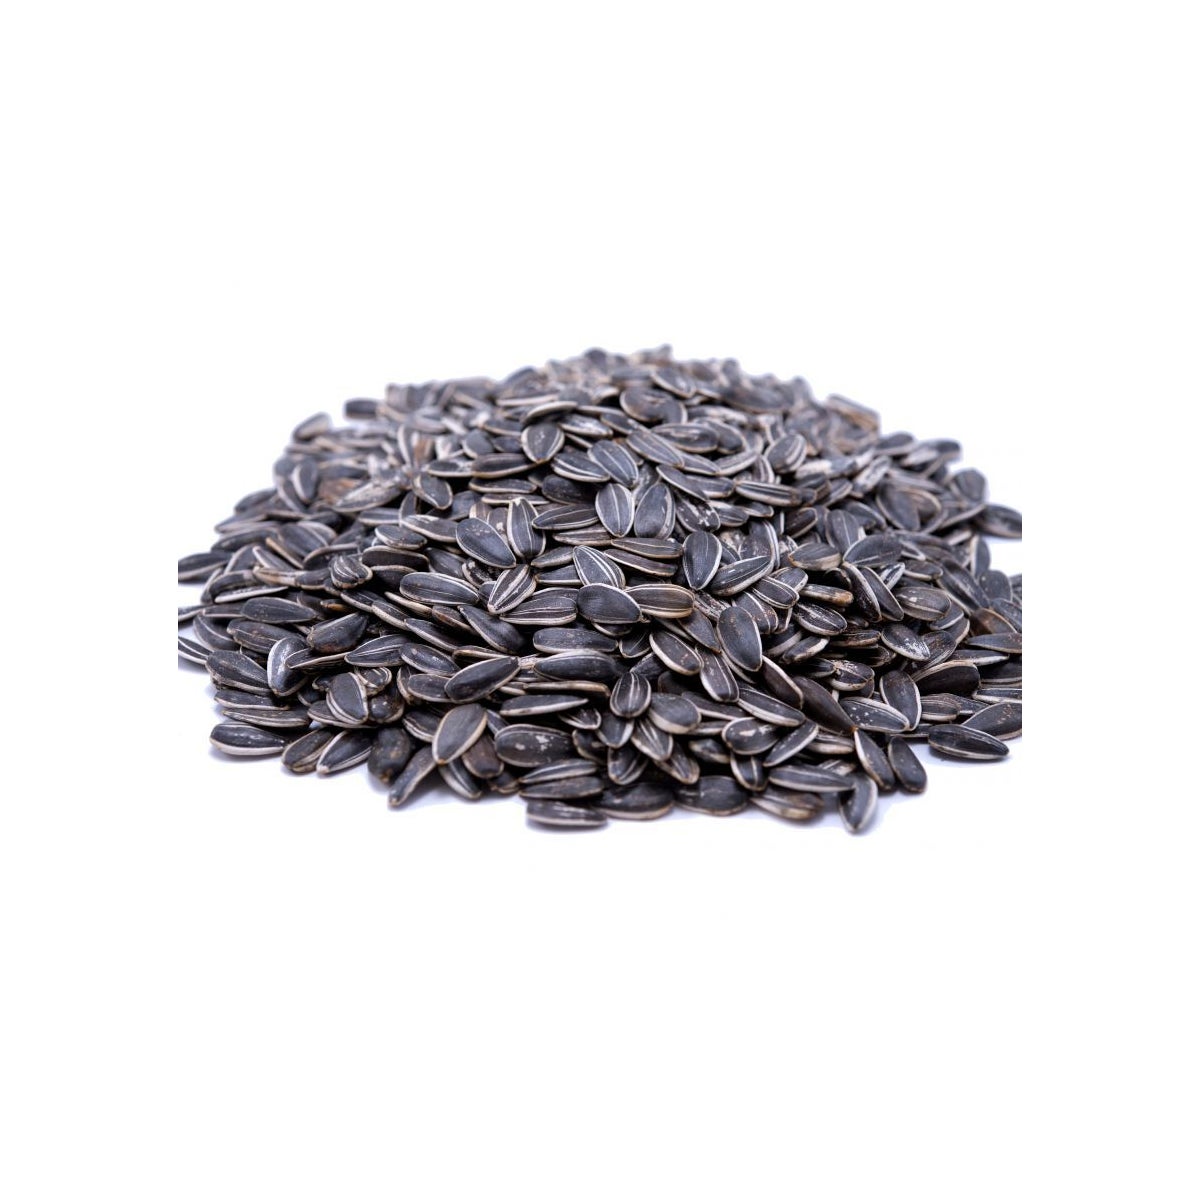 ROASTED SALTED SUNFLOWER SEEDS  (PACK OF 1 LB)